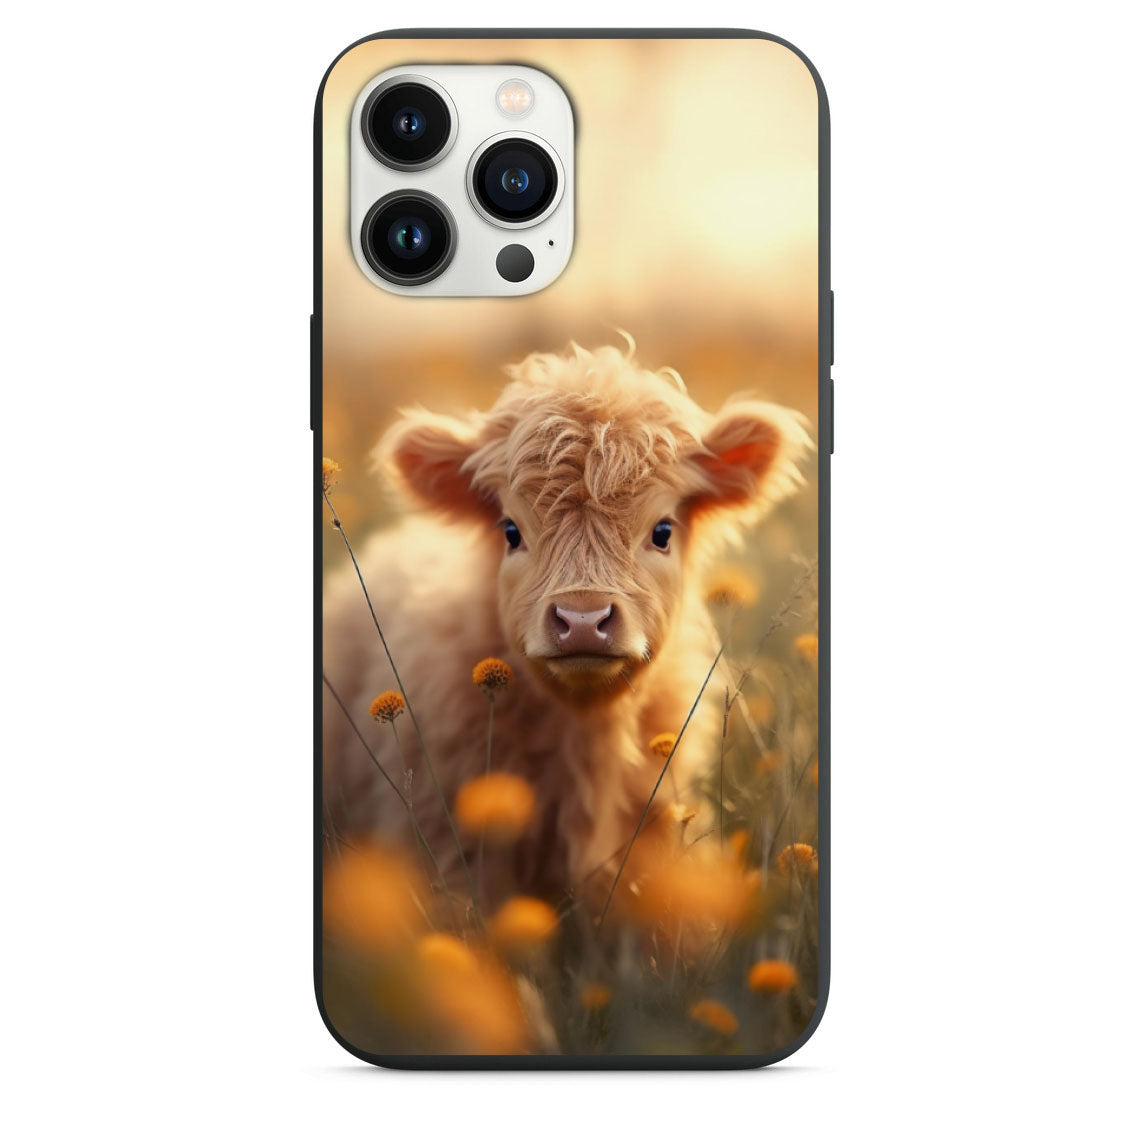 Adorable Baby Cow in a Flower Field Design Phone Case for iPhone 7 8 X XS XR SE 11 12 13 14 Pro Max Mini Note 10 20 s10 s10s s20 s21 20 Plus Ultra